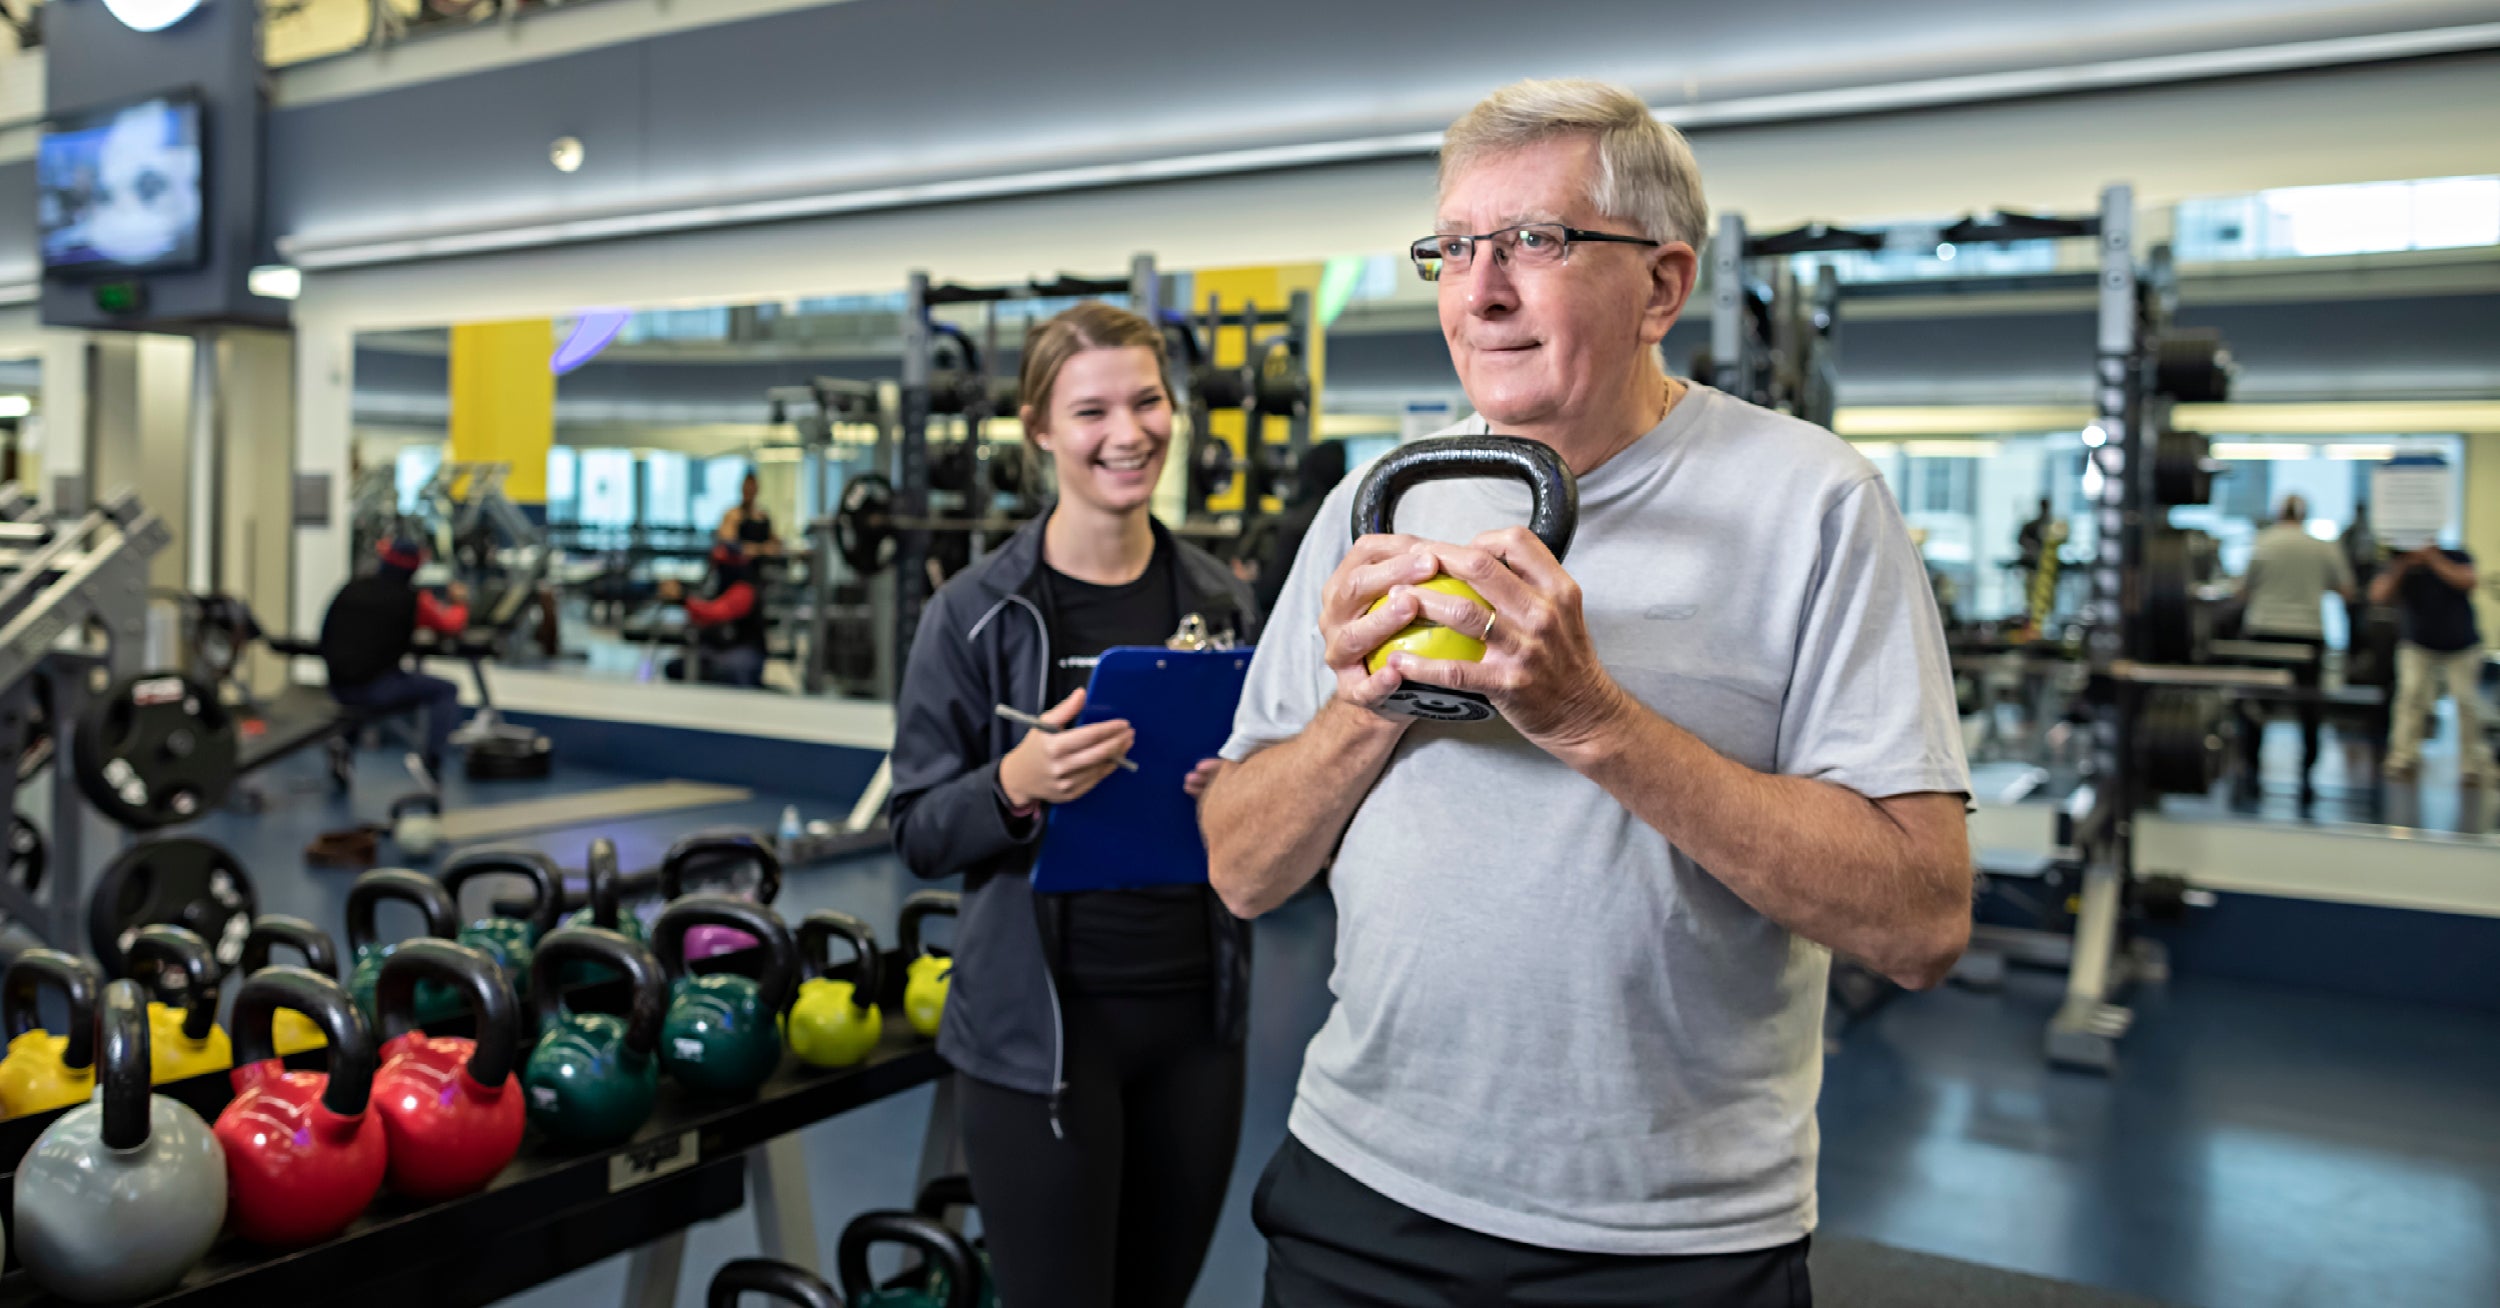 Dave Mancke leaned on LVHN Fitness, both before and after his COVID-19 diagnosis